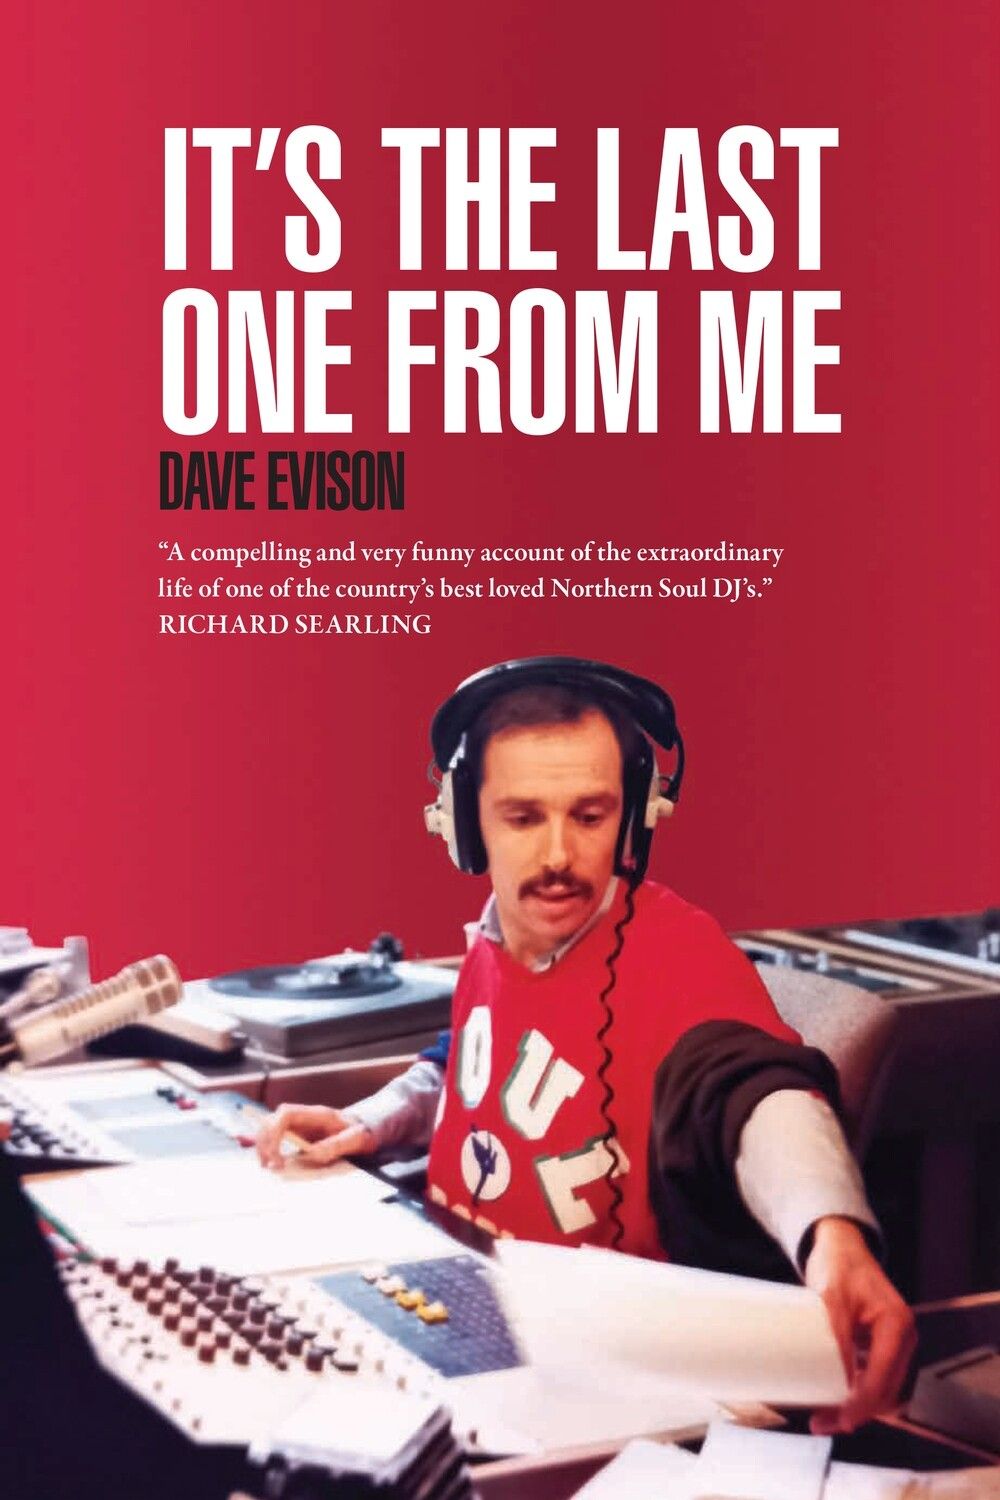 DAVE EVISON - IT'S THE LAST ONE FROM ME